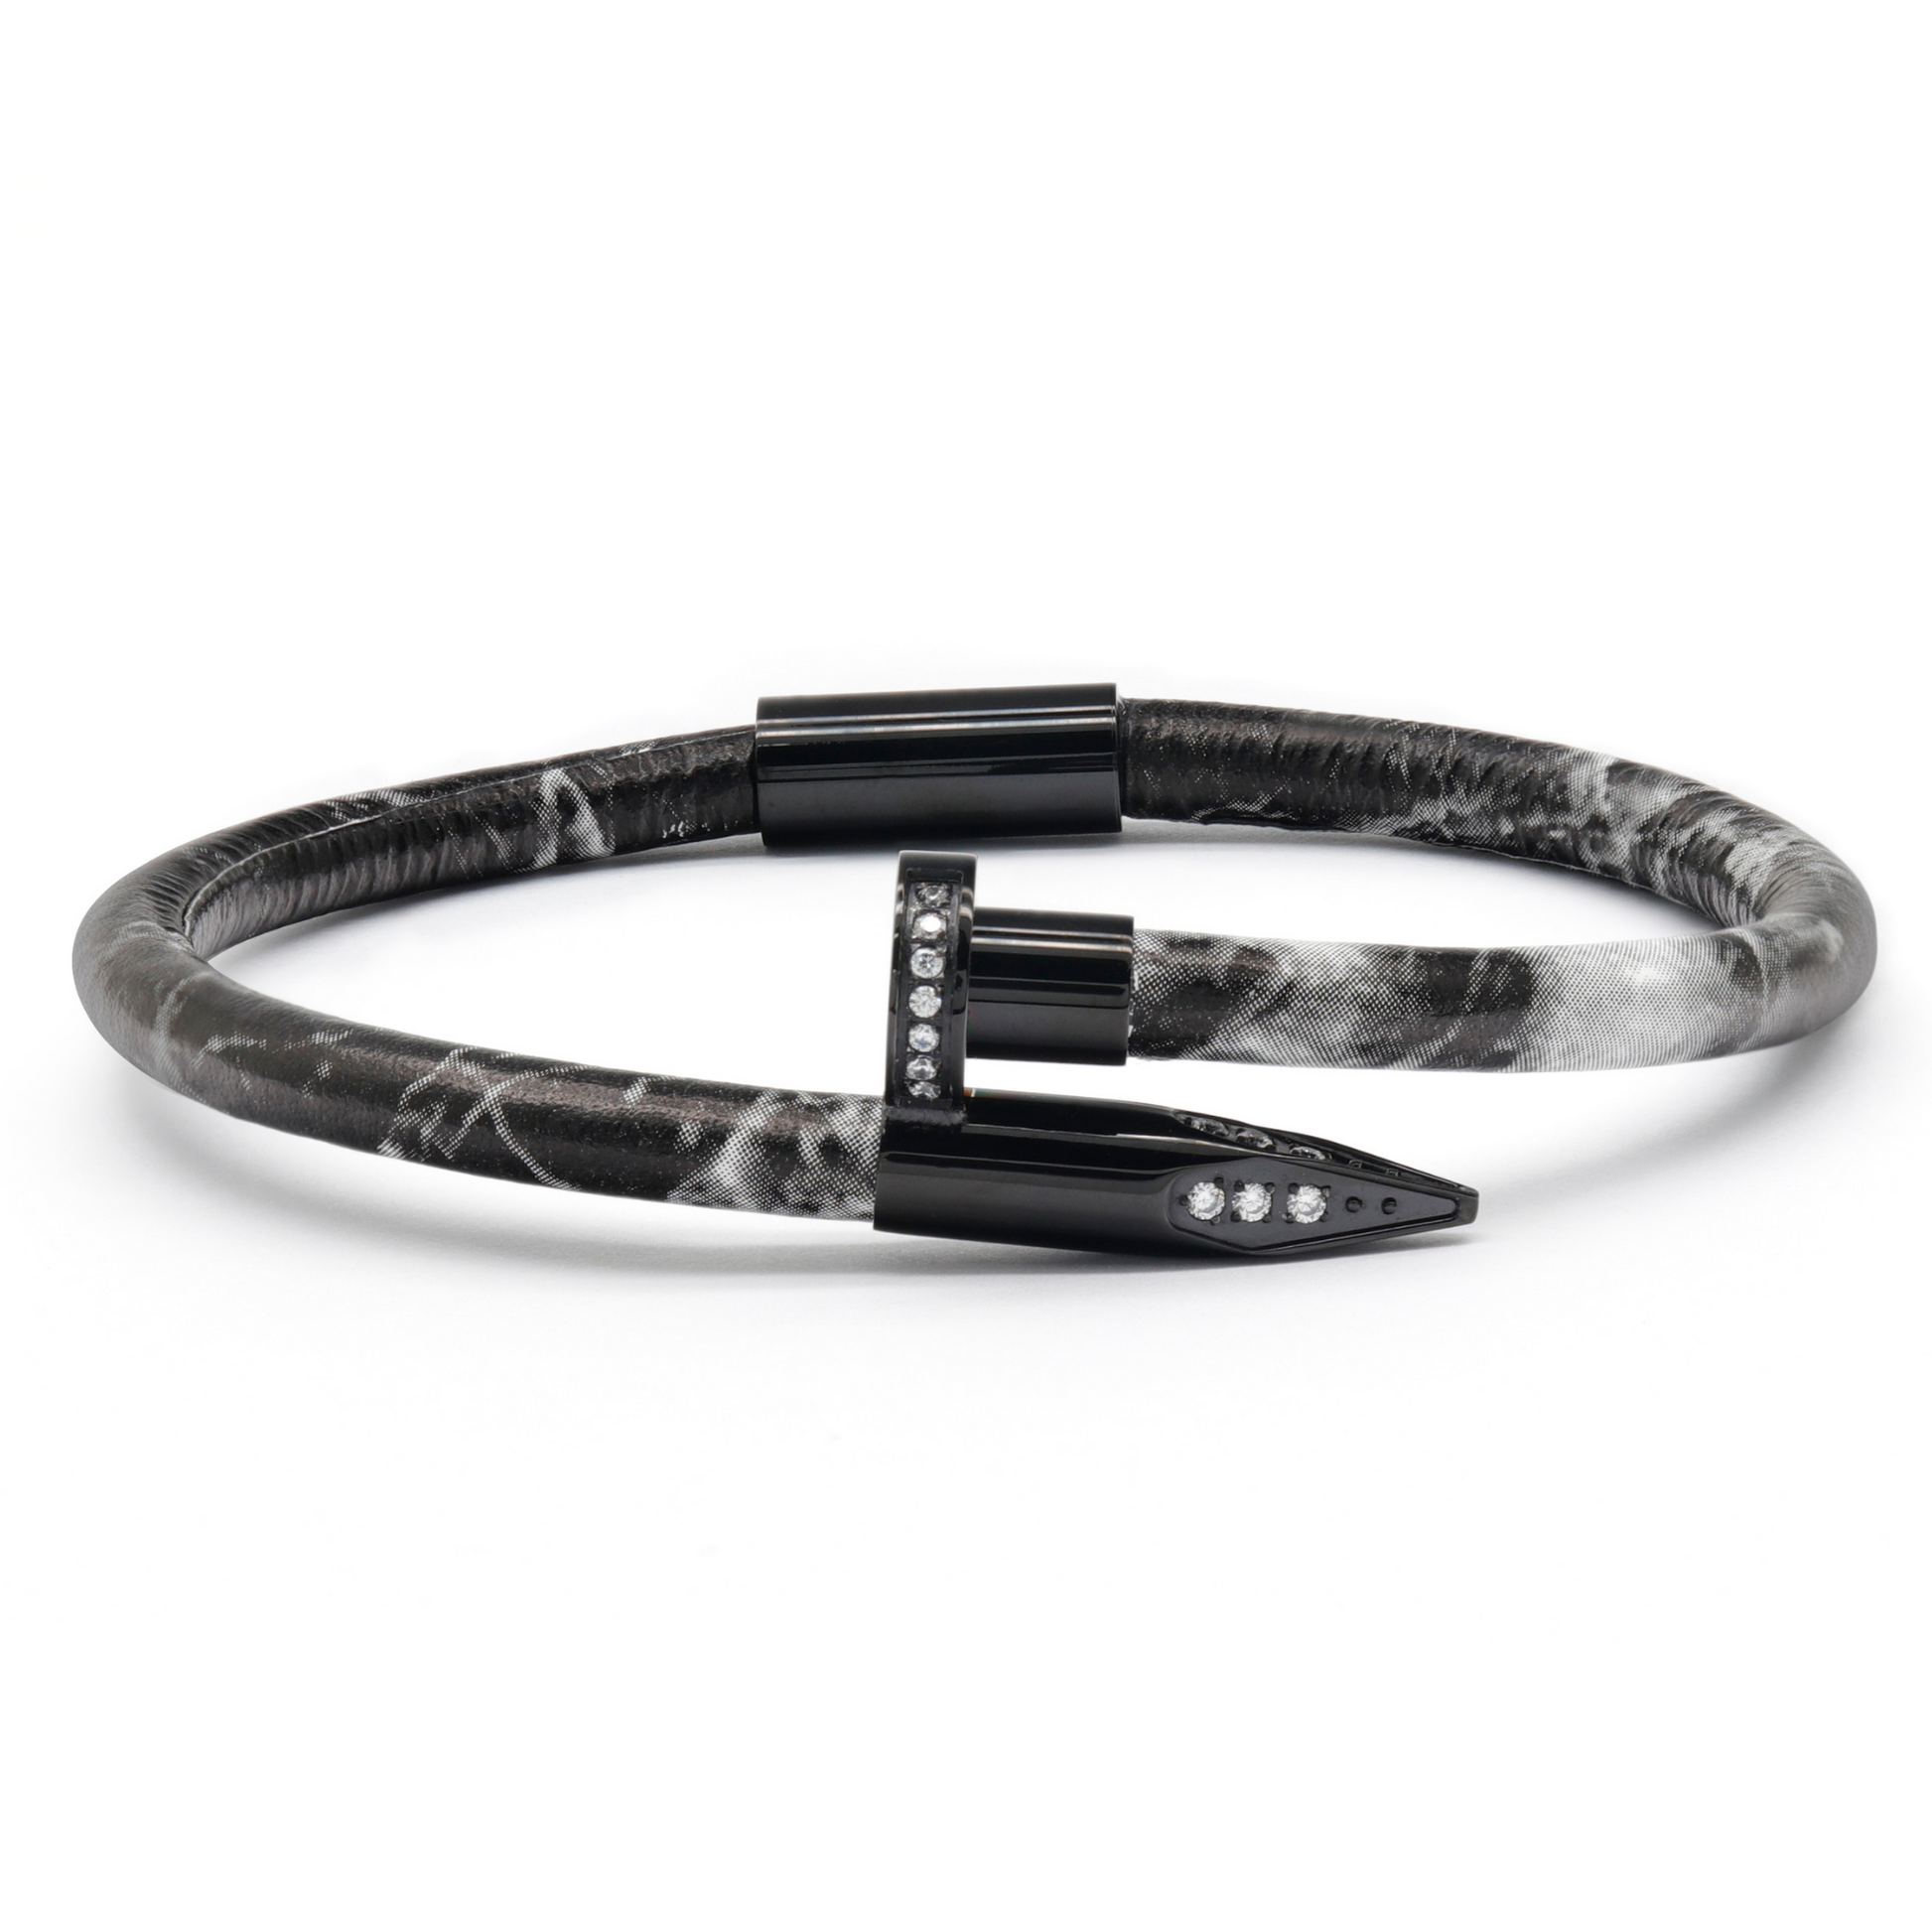 Bracelet - Black Leather with Golden Nail and Zircon Diamond – GT